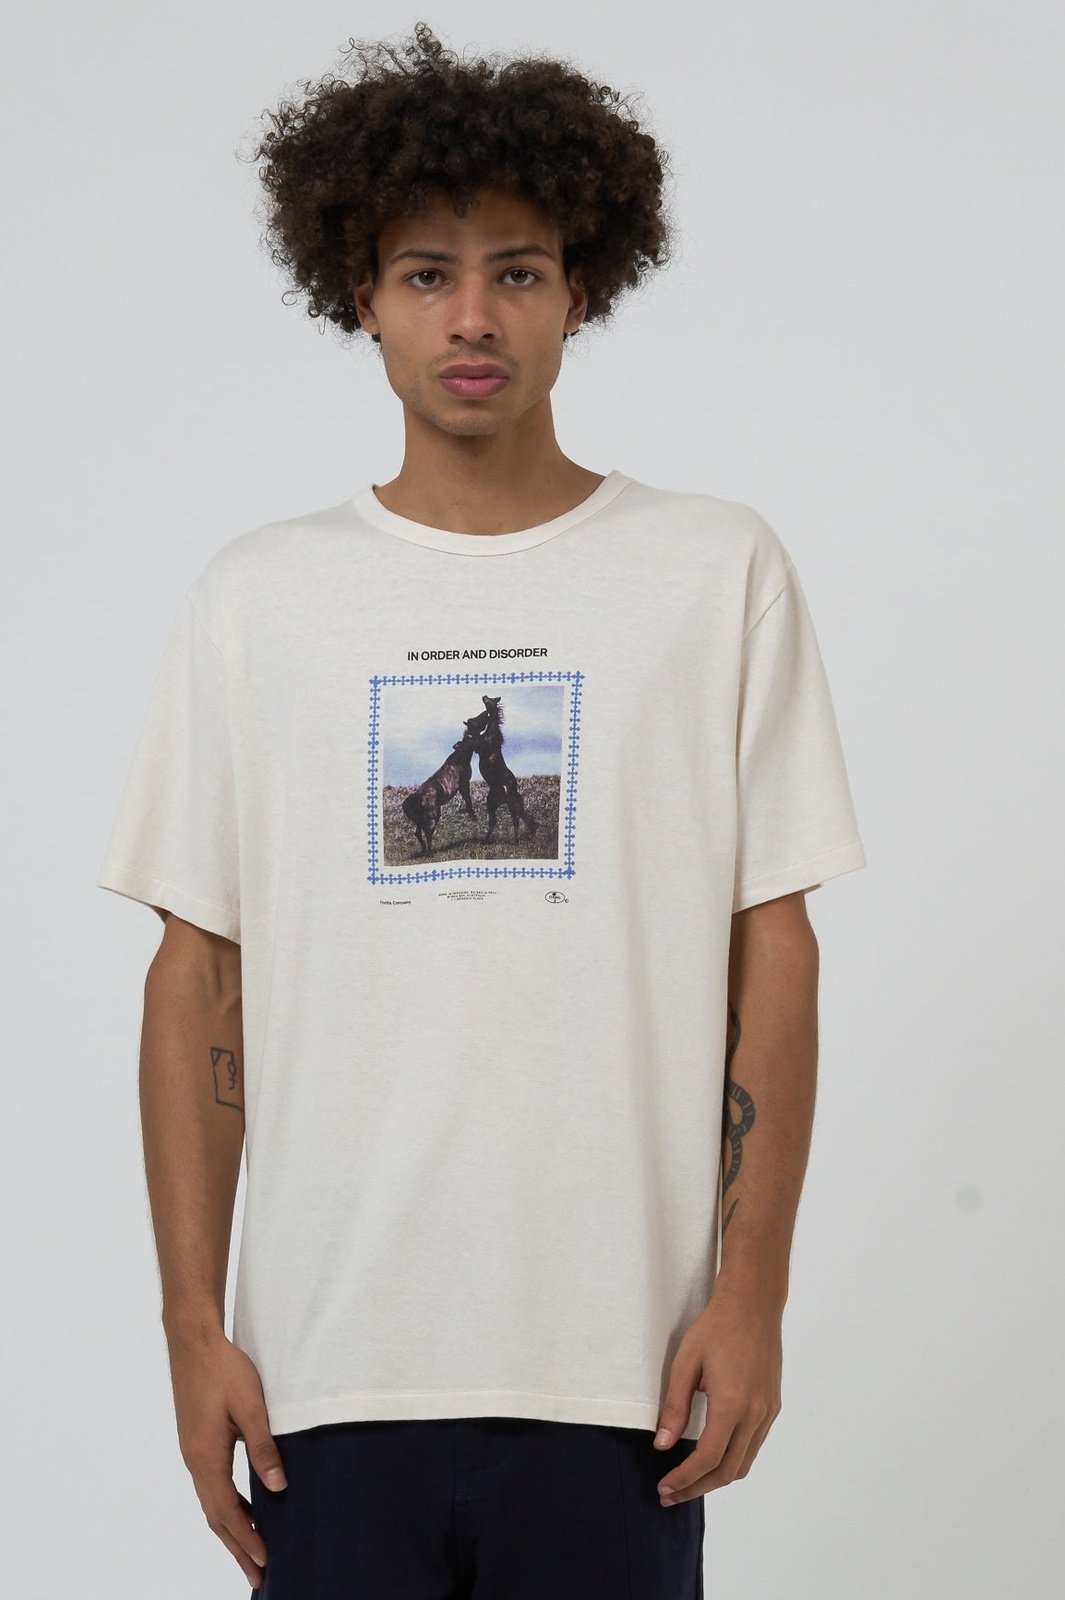 THRILLS Hemp in order and disorder merch fit tee - Heritage white